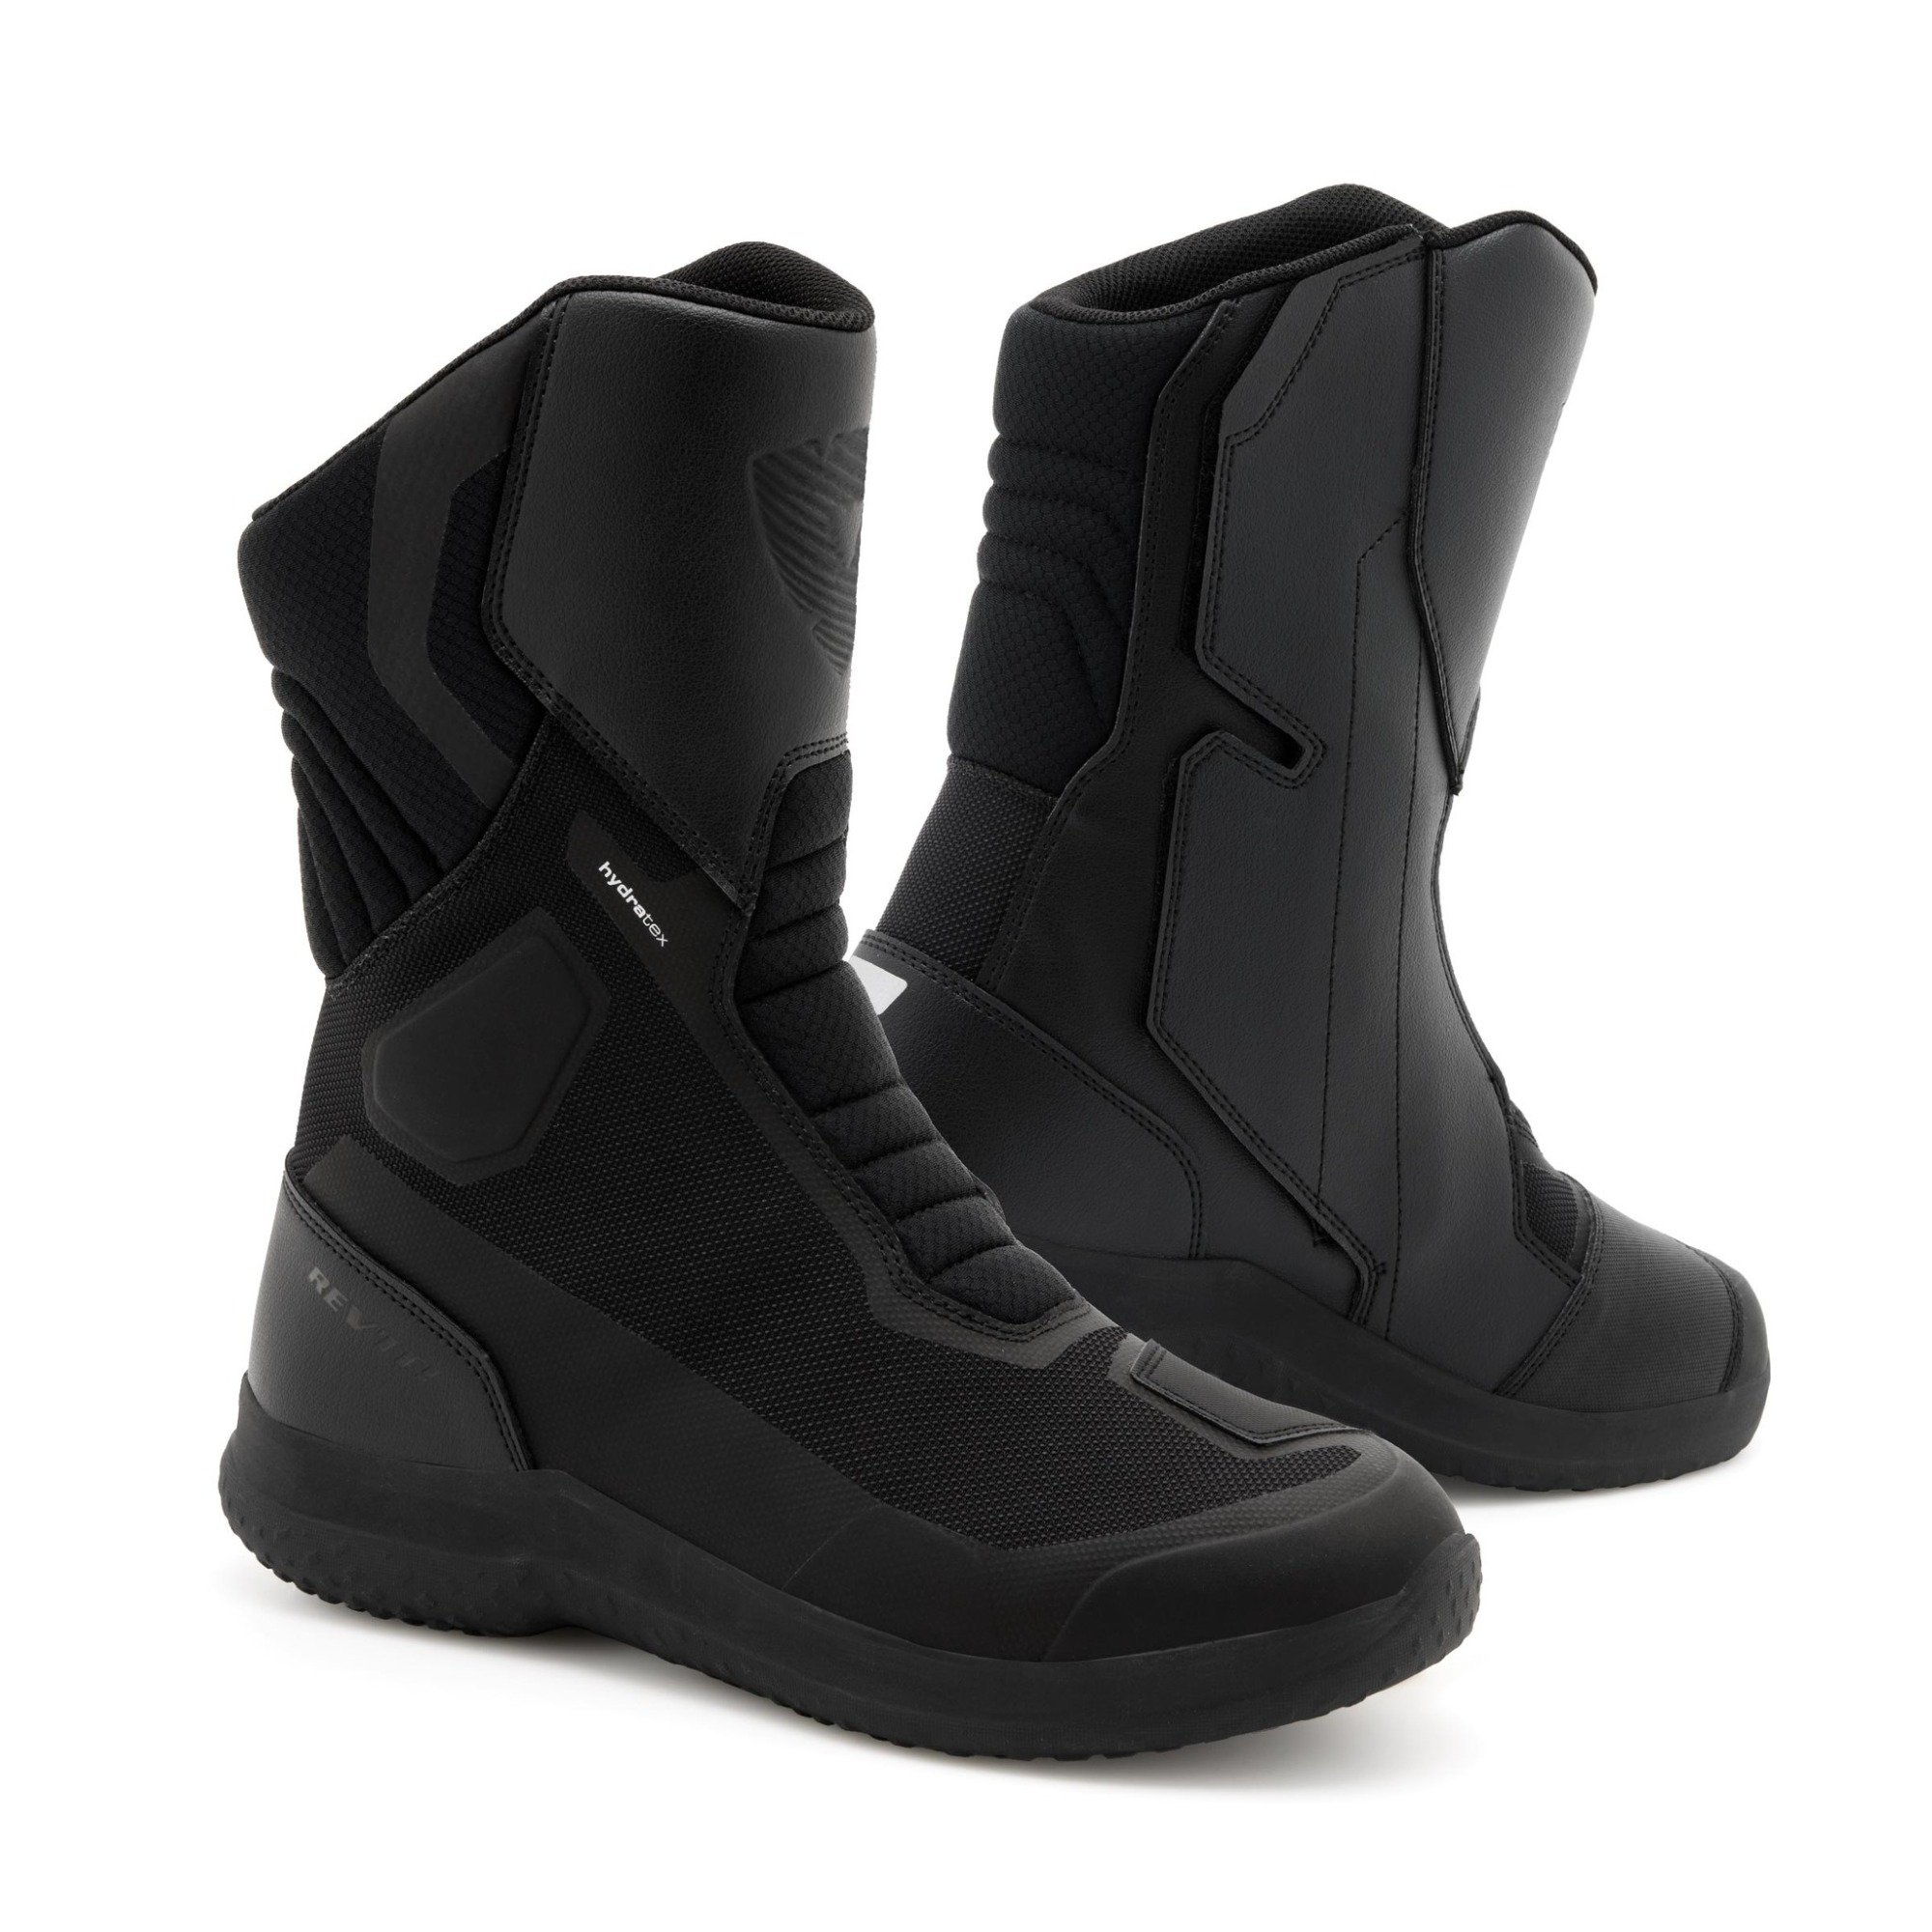 Image of REV'IT! Boots Pulse H2O Black Size 44 ID 8700001330657